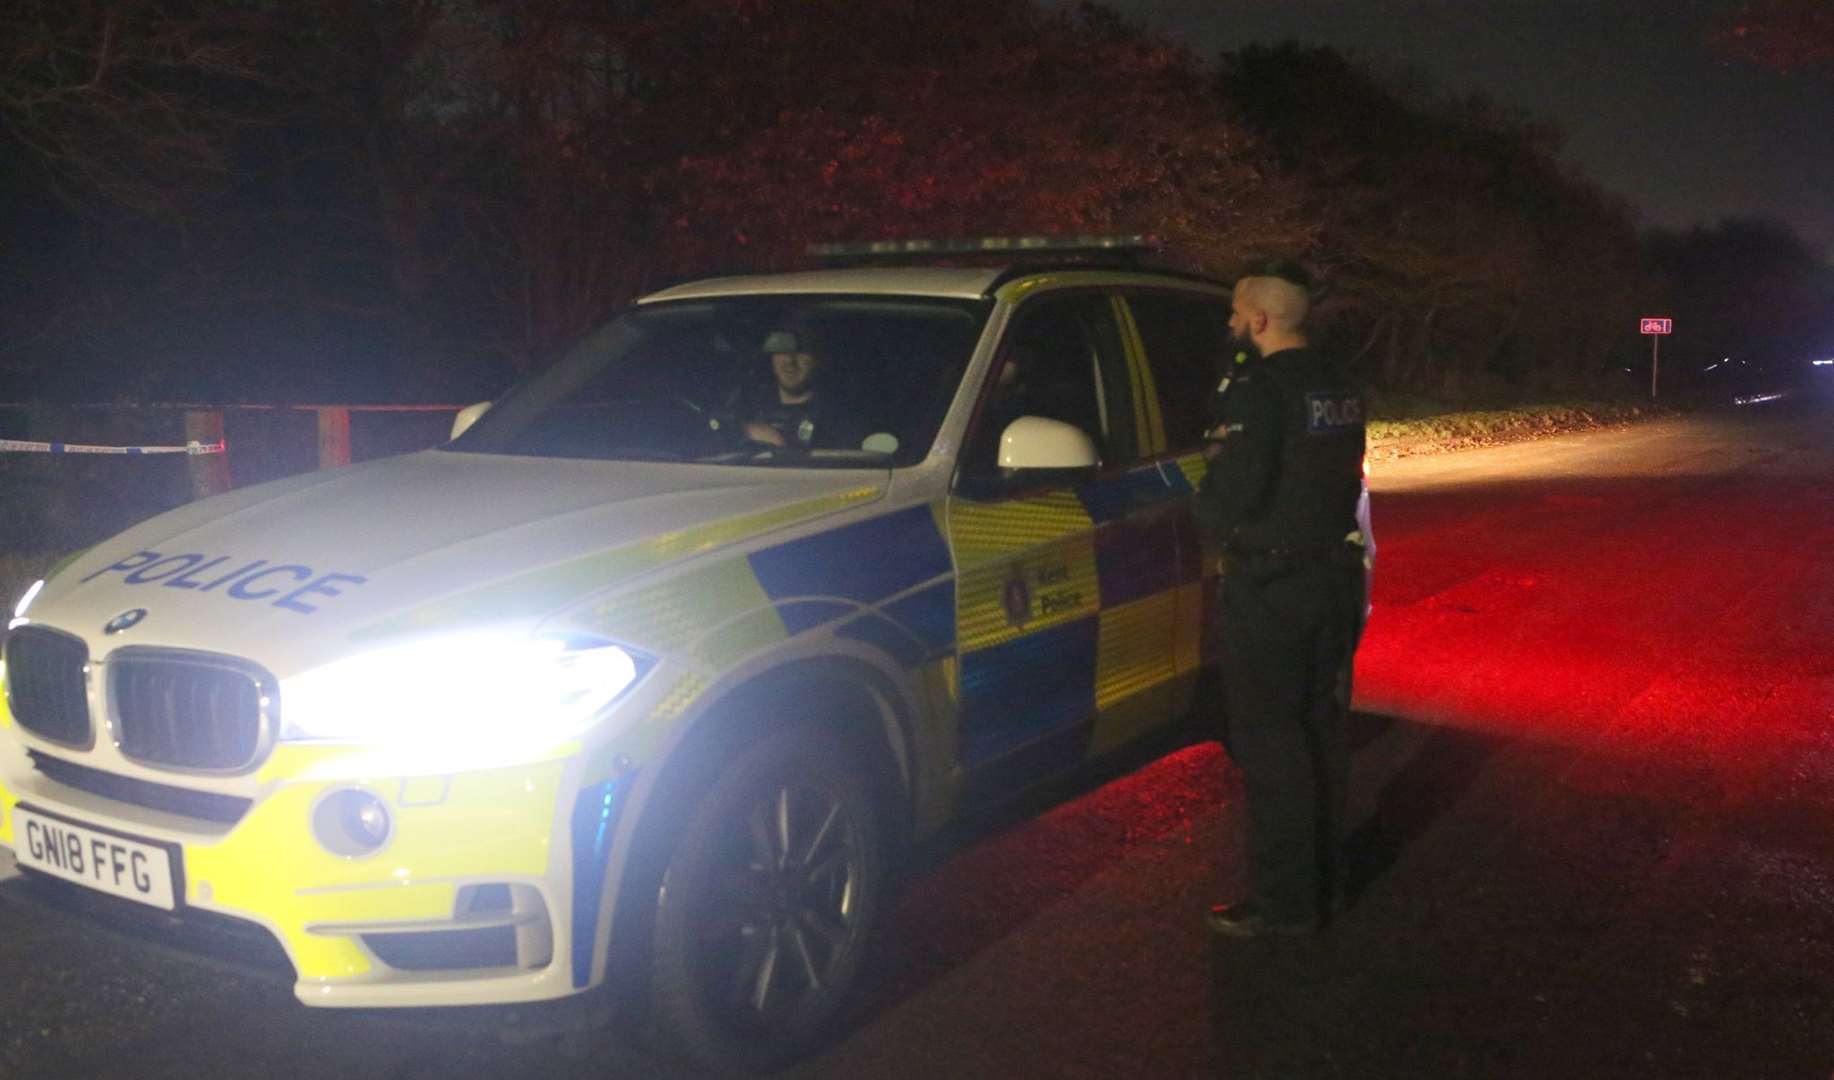 Uniformed officers at the scene by Dartford heath (Picture: UKNIP)